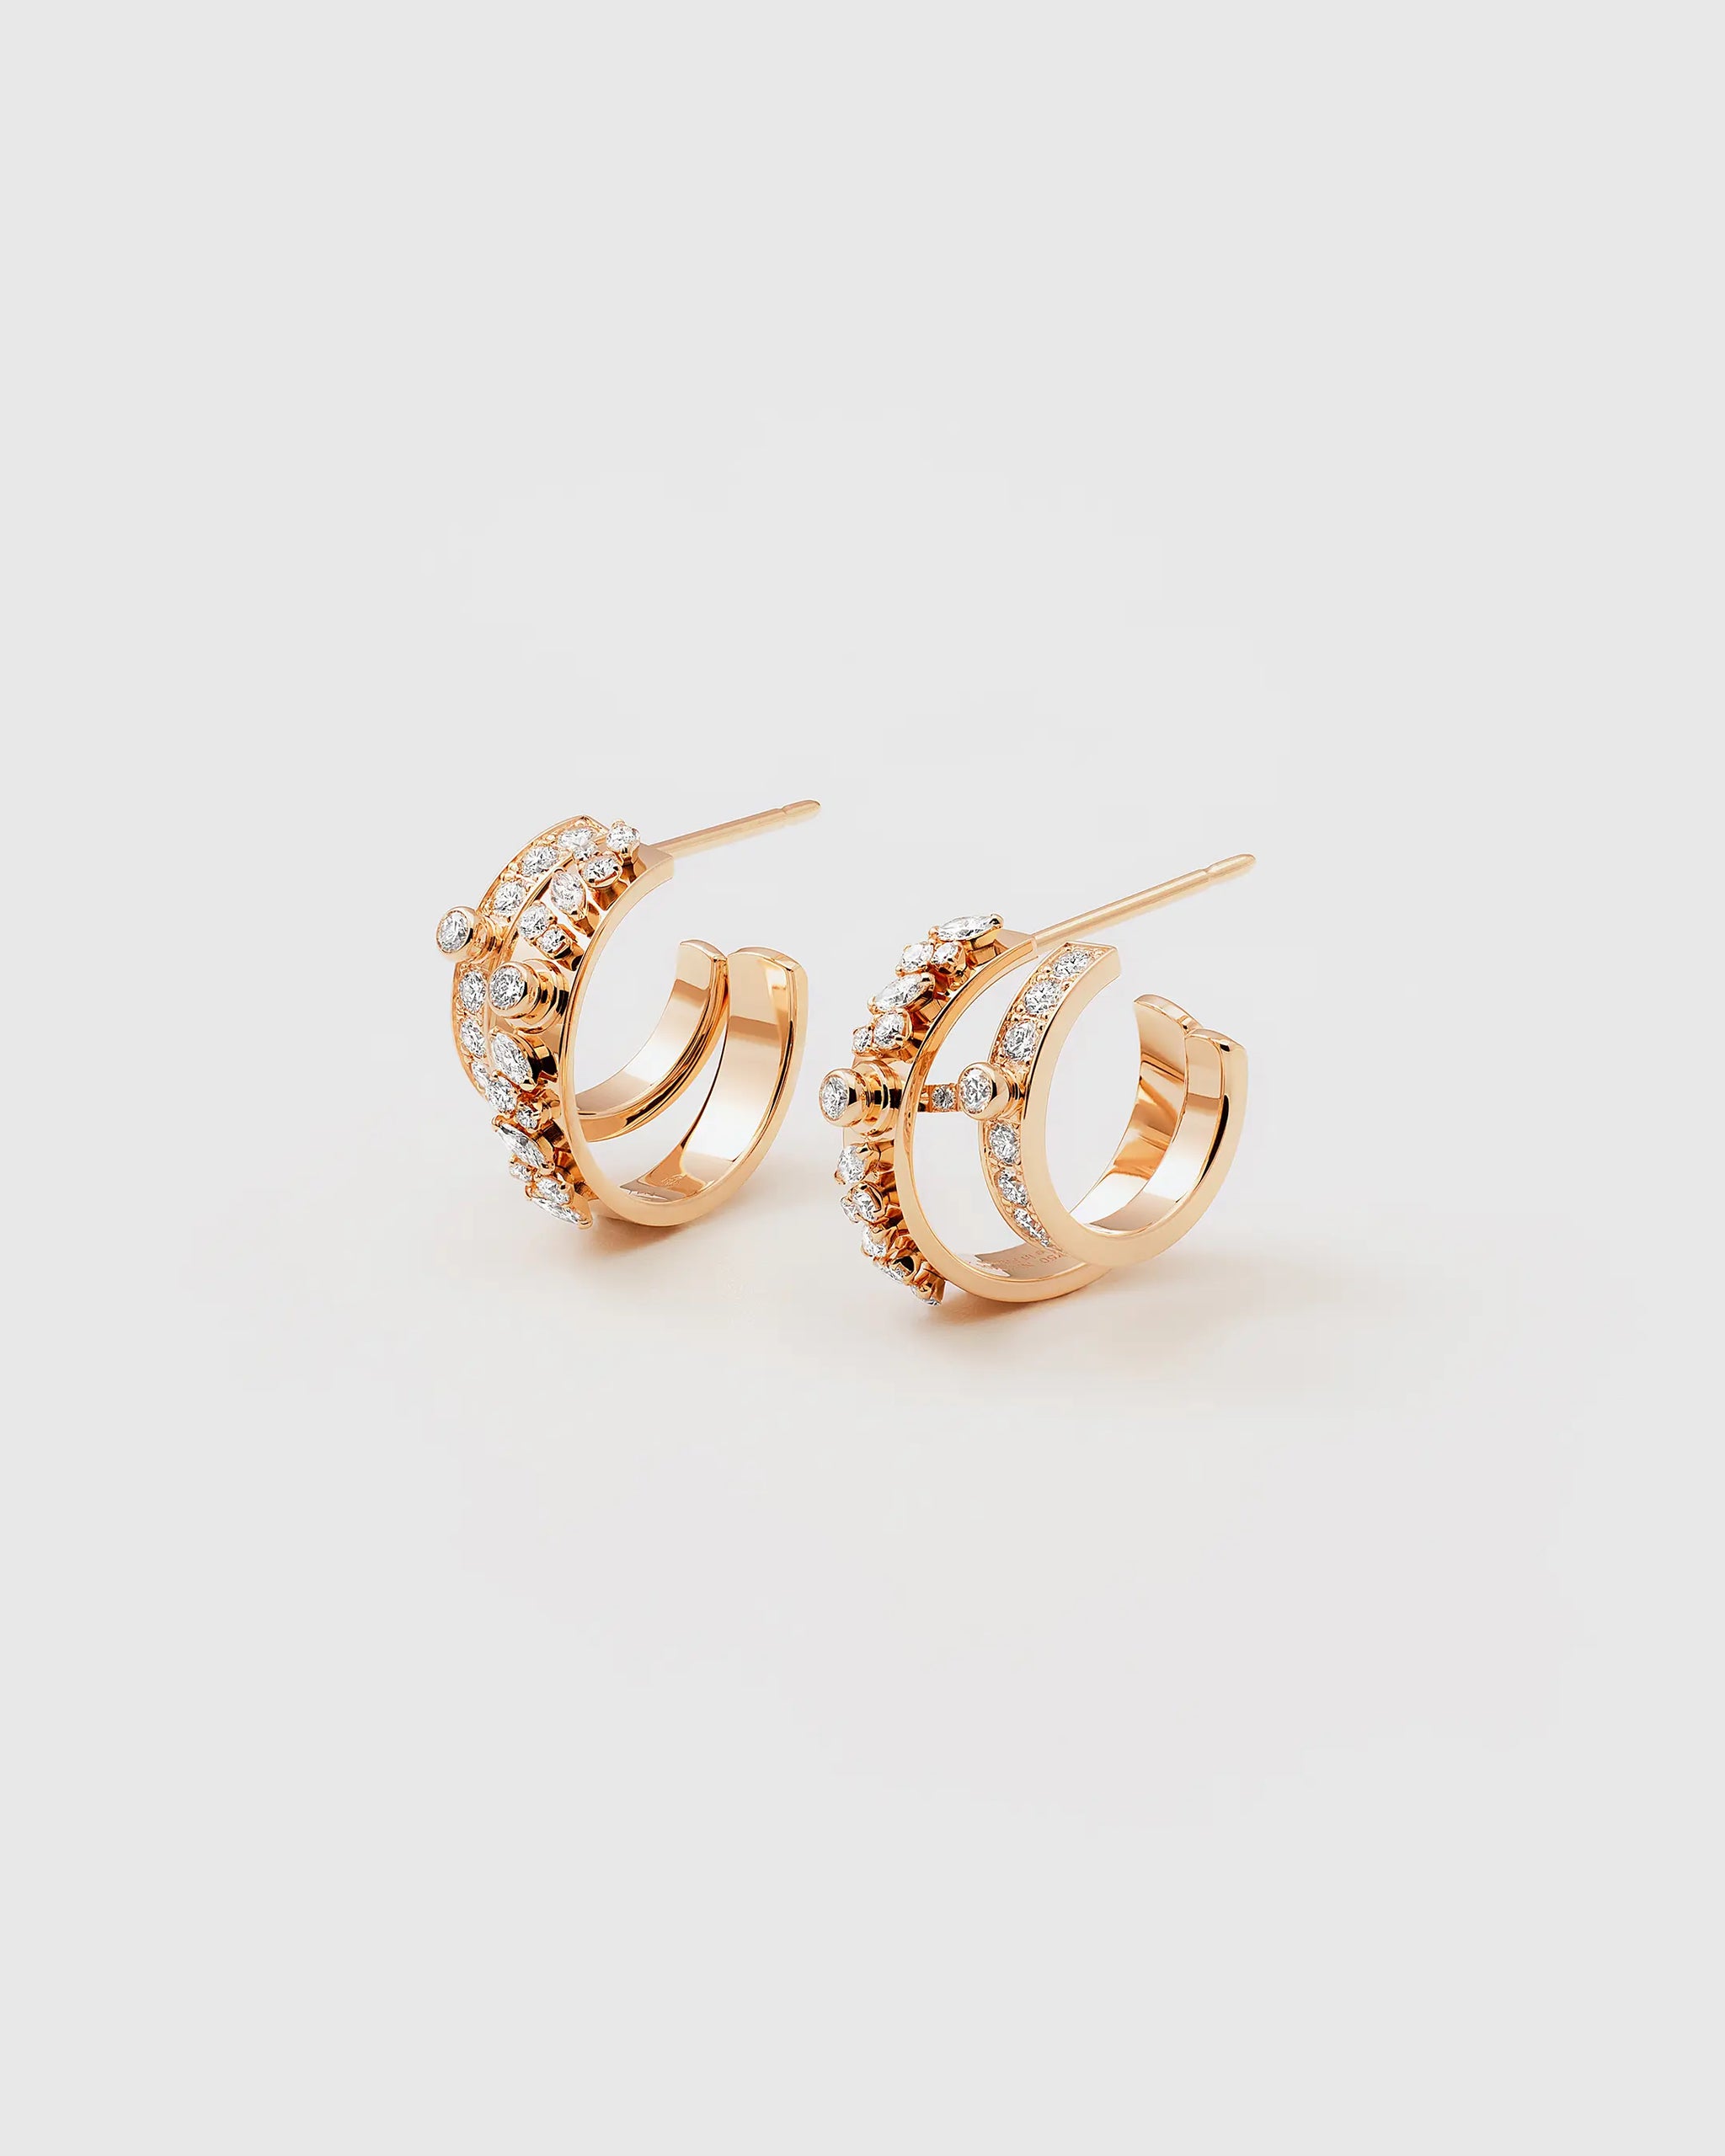 Under The Stars Mood Hoops in Rose Gold - 1 - Nouvel Heritage